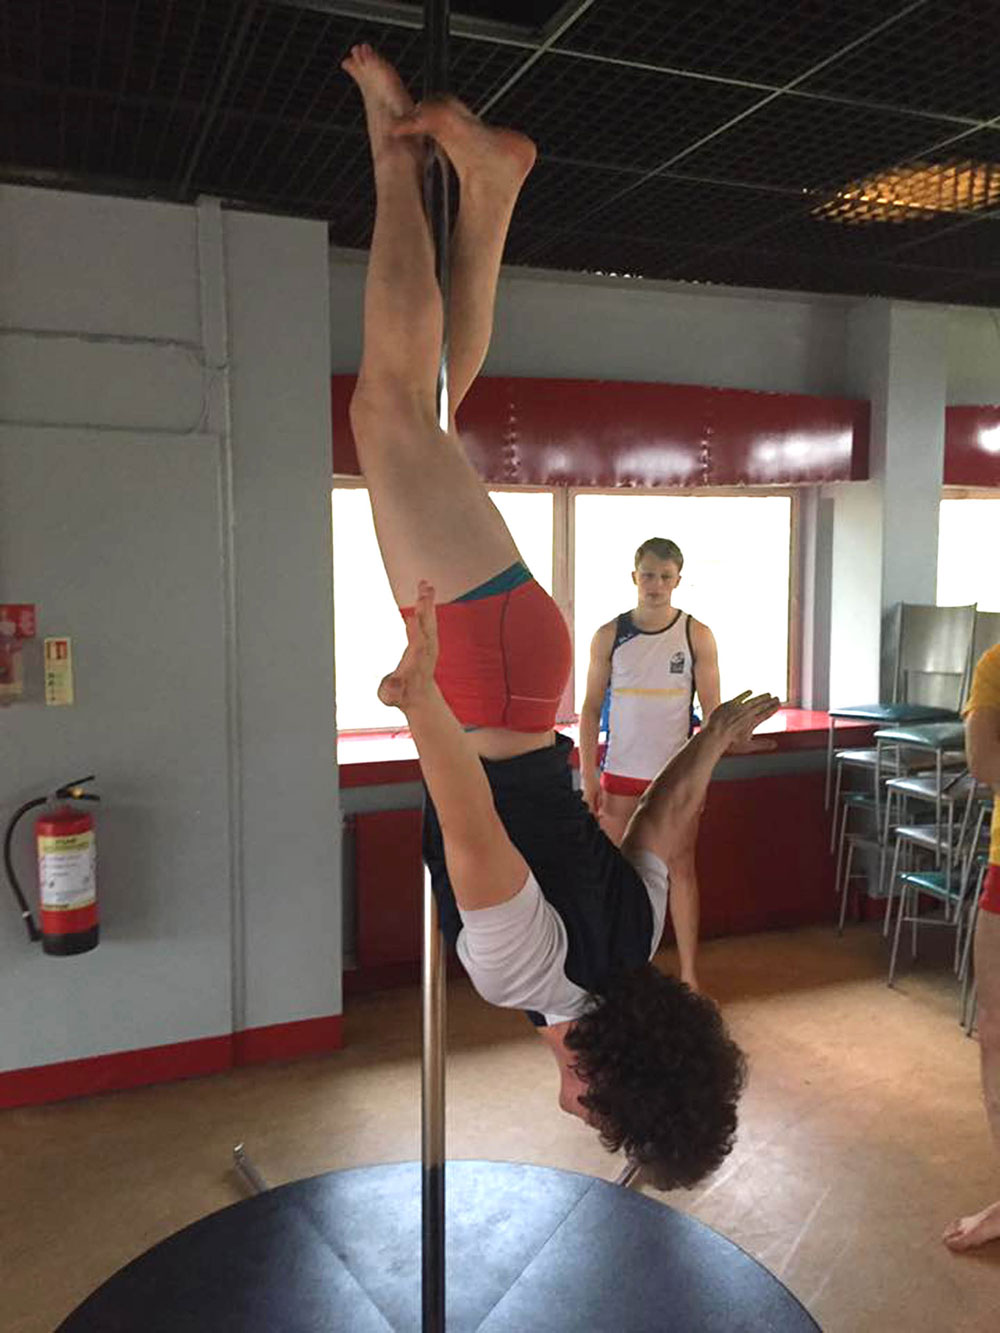 The lads have even learned to hang upside-down 